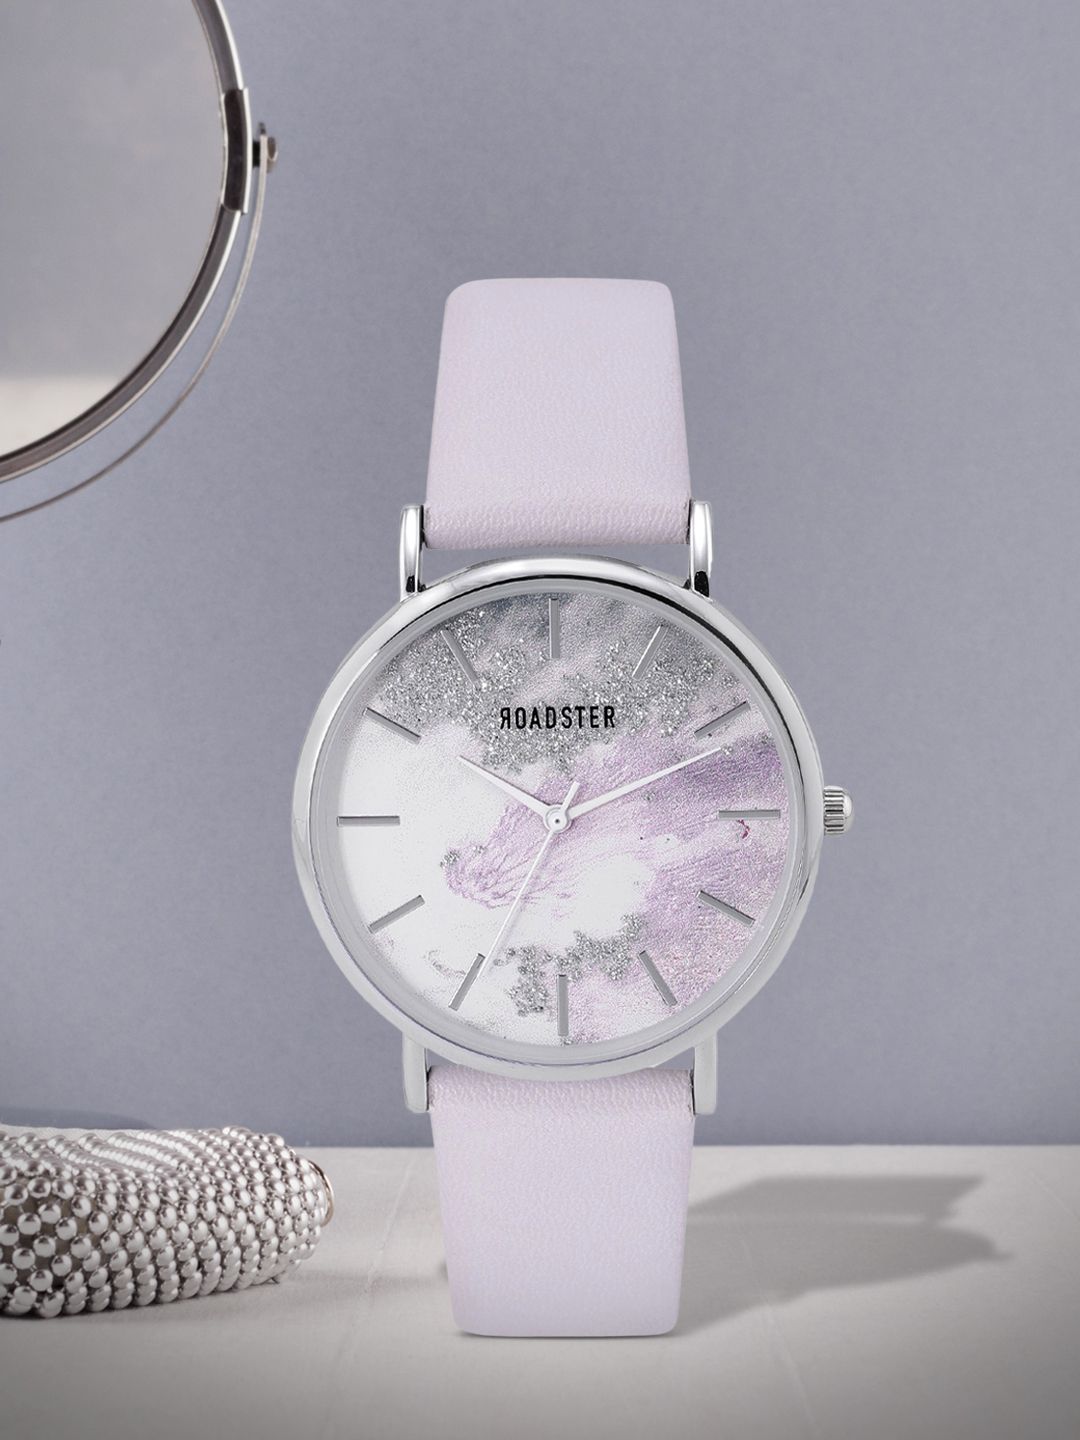 The Roadster Lifestyle Co Women Off-White & Lavender Analogue Watch MFB-PN-PF-DK2567 Price in India